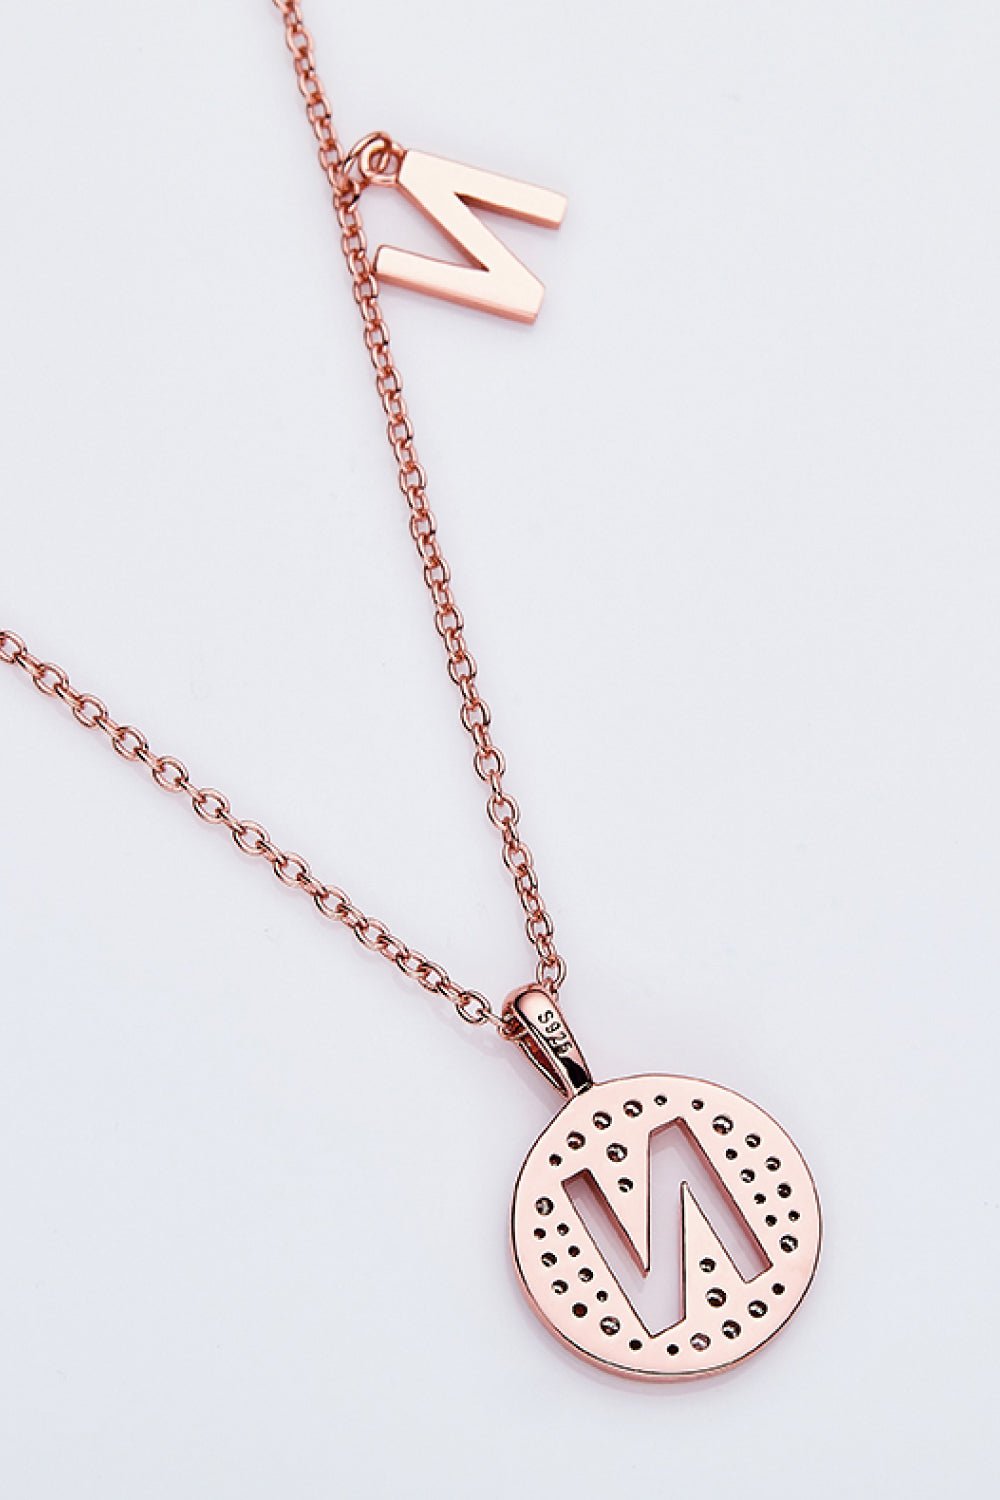 Moissanite K to T Pendant Necklace - Fashion Girl Online Store